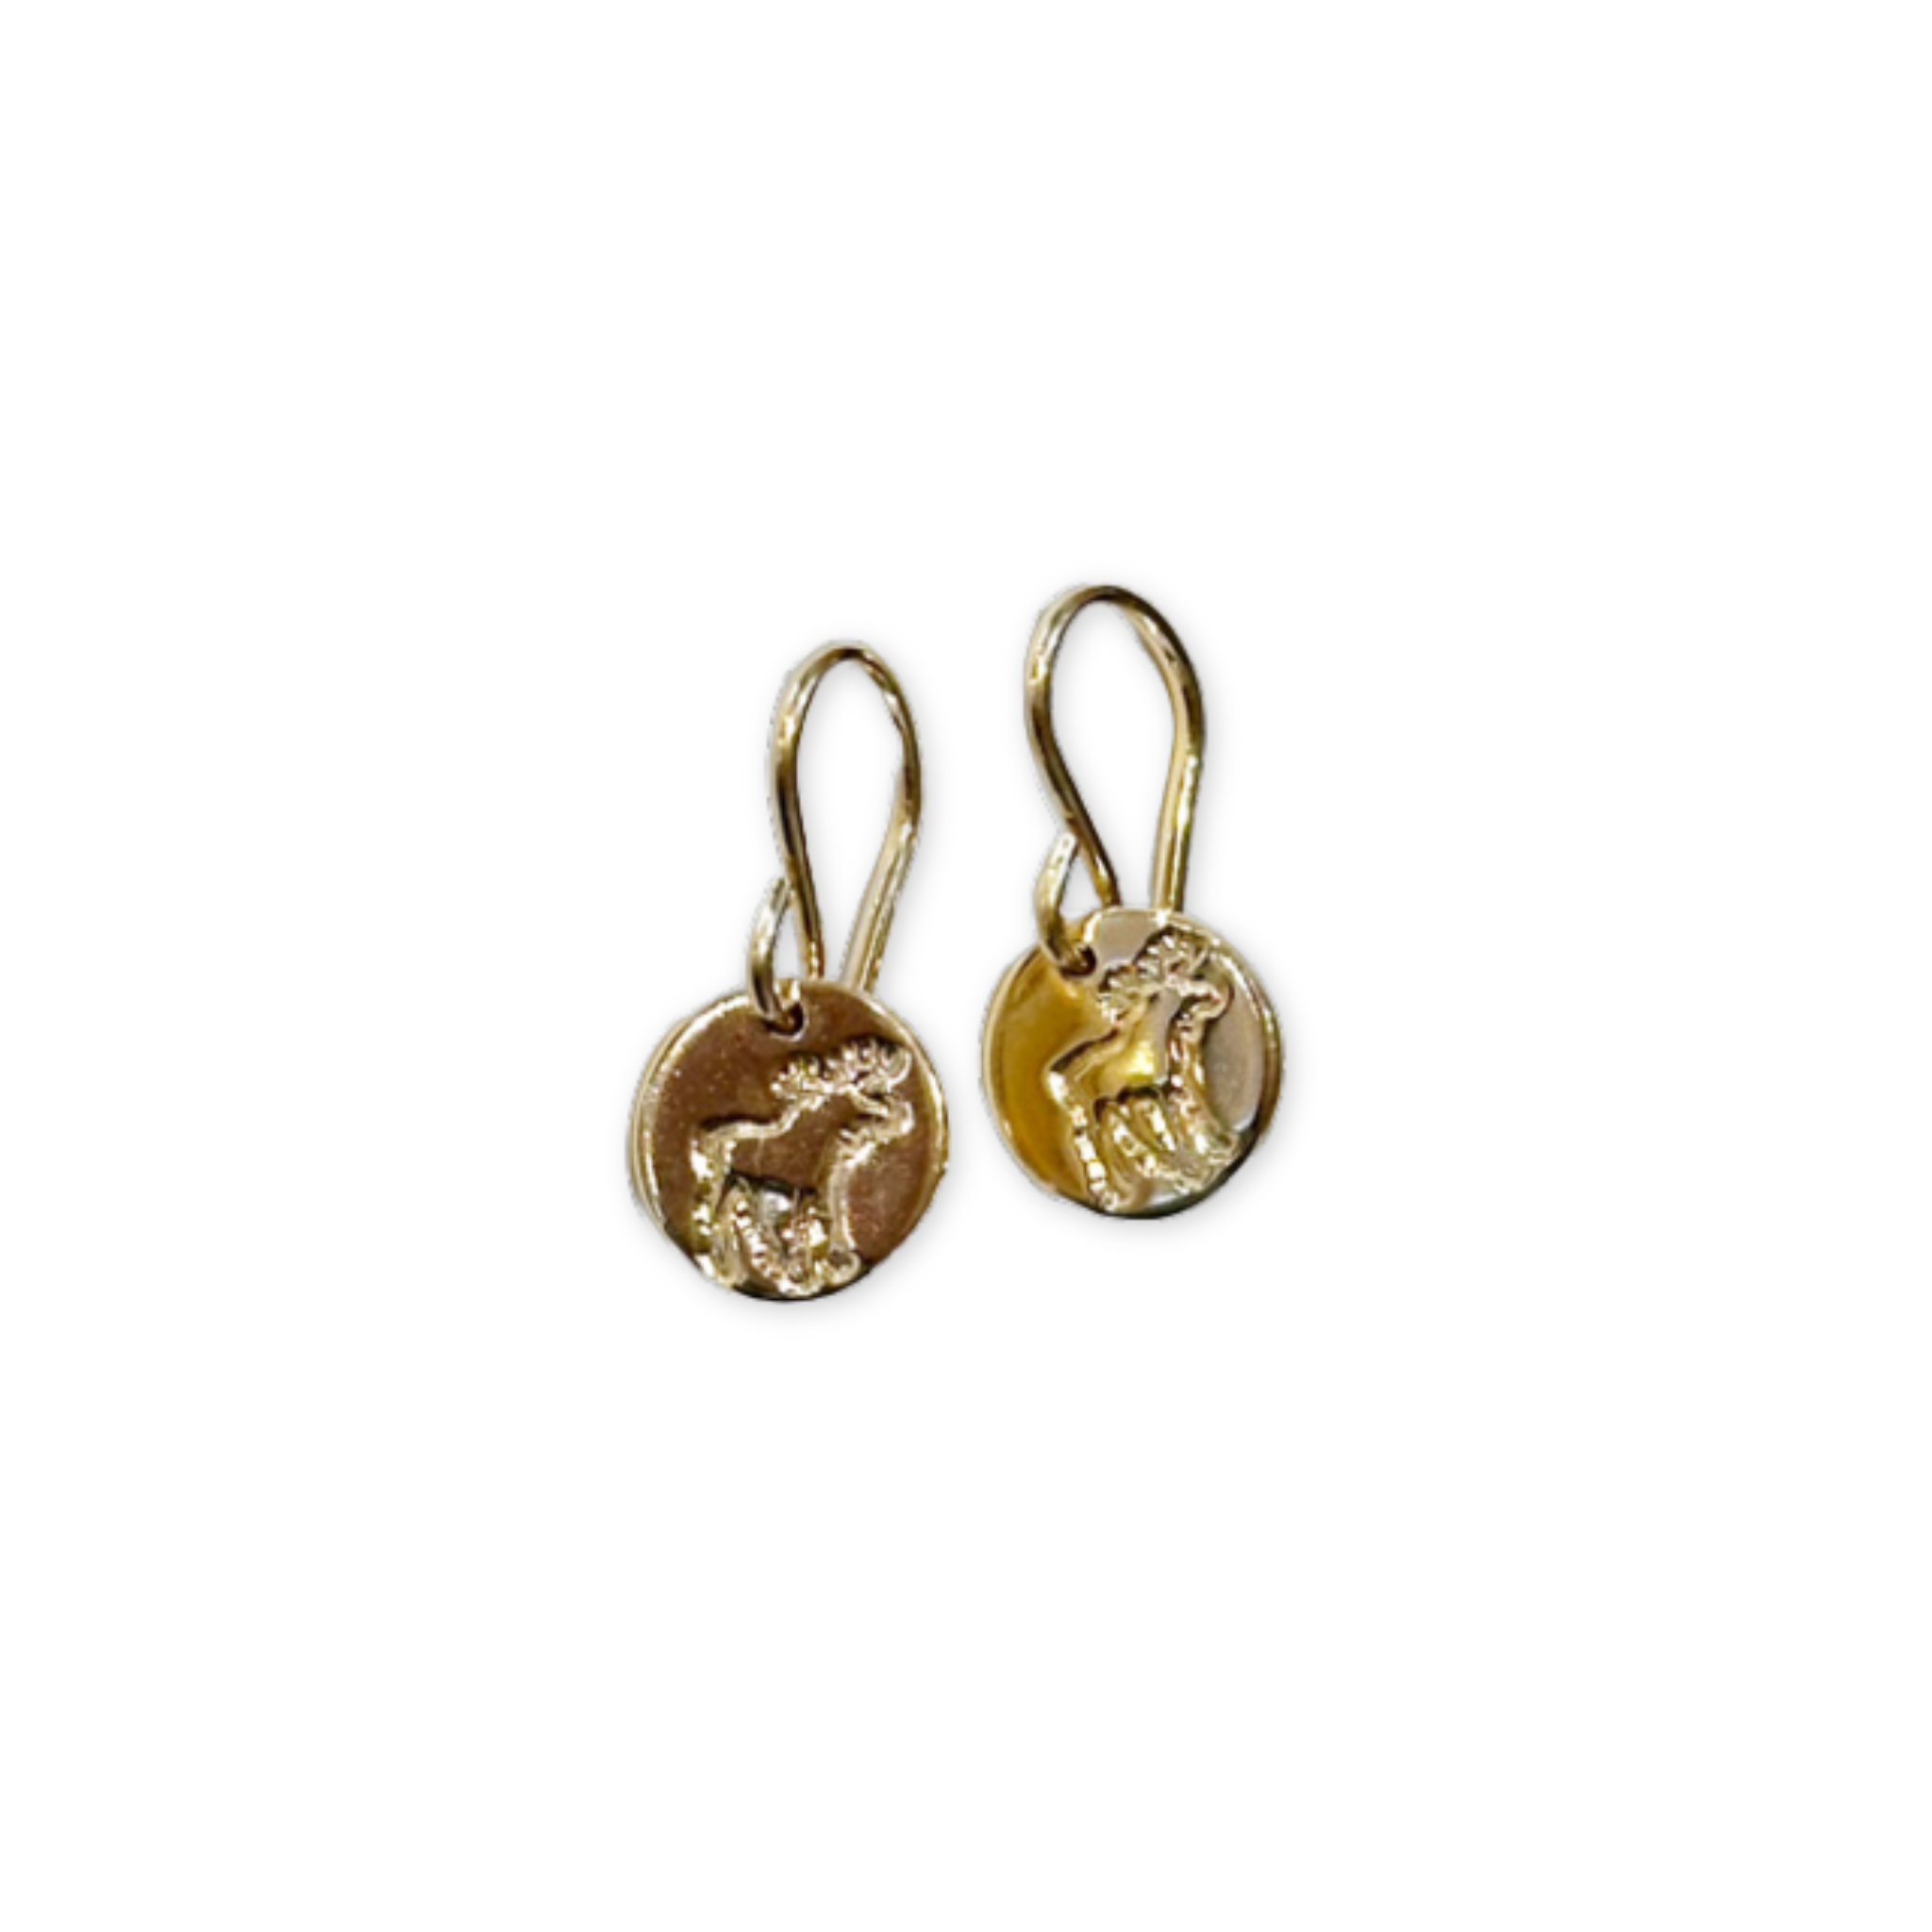 gold earrings with stamped moose